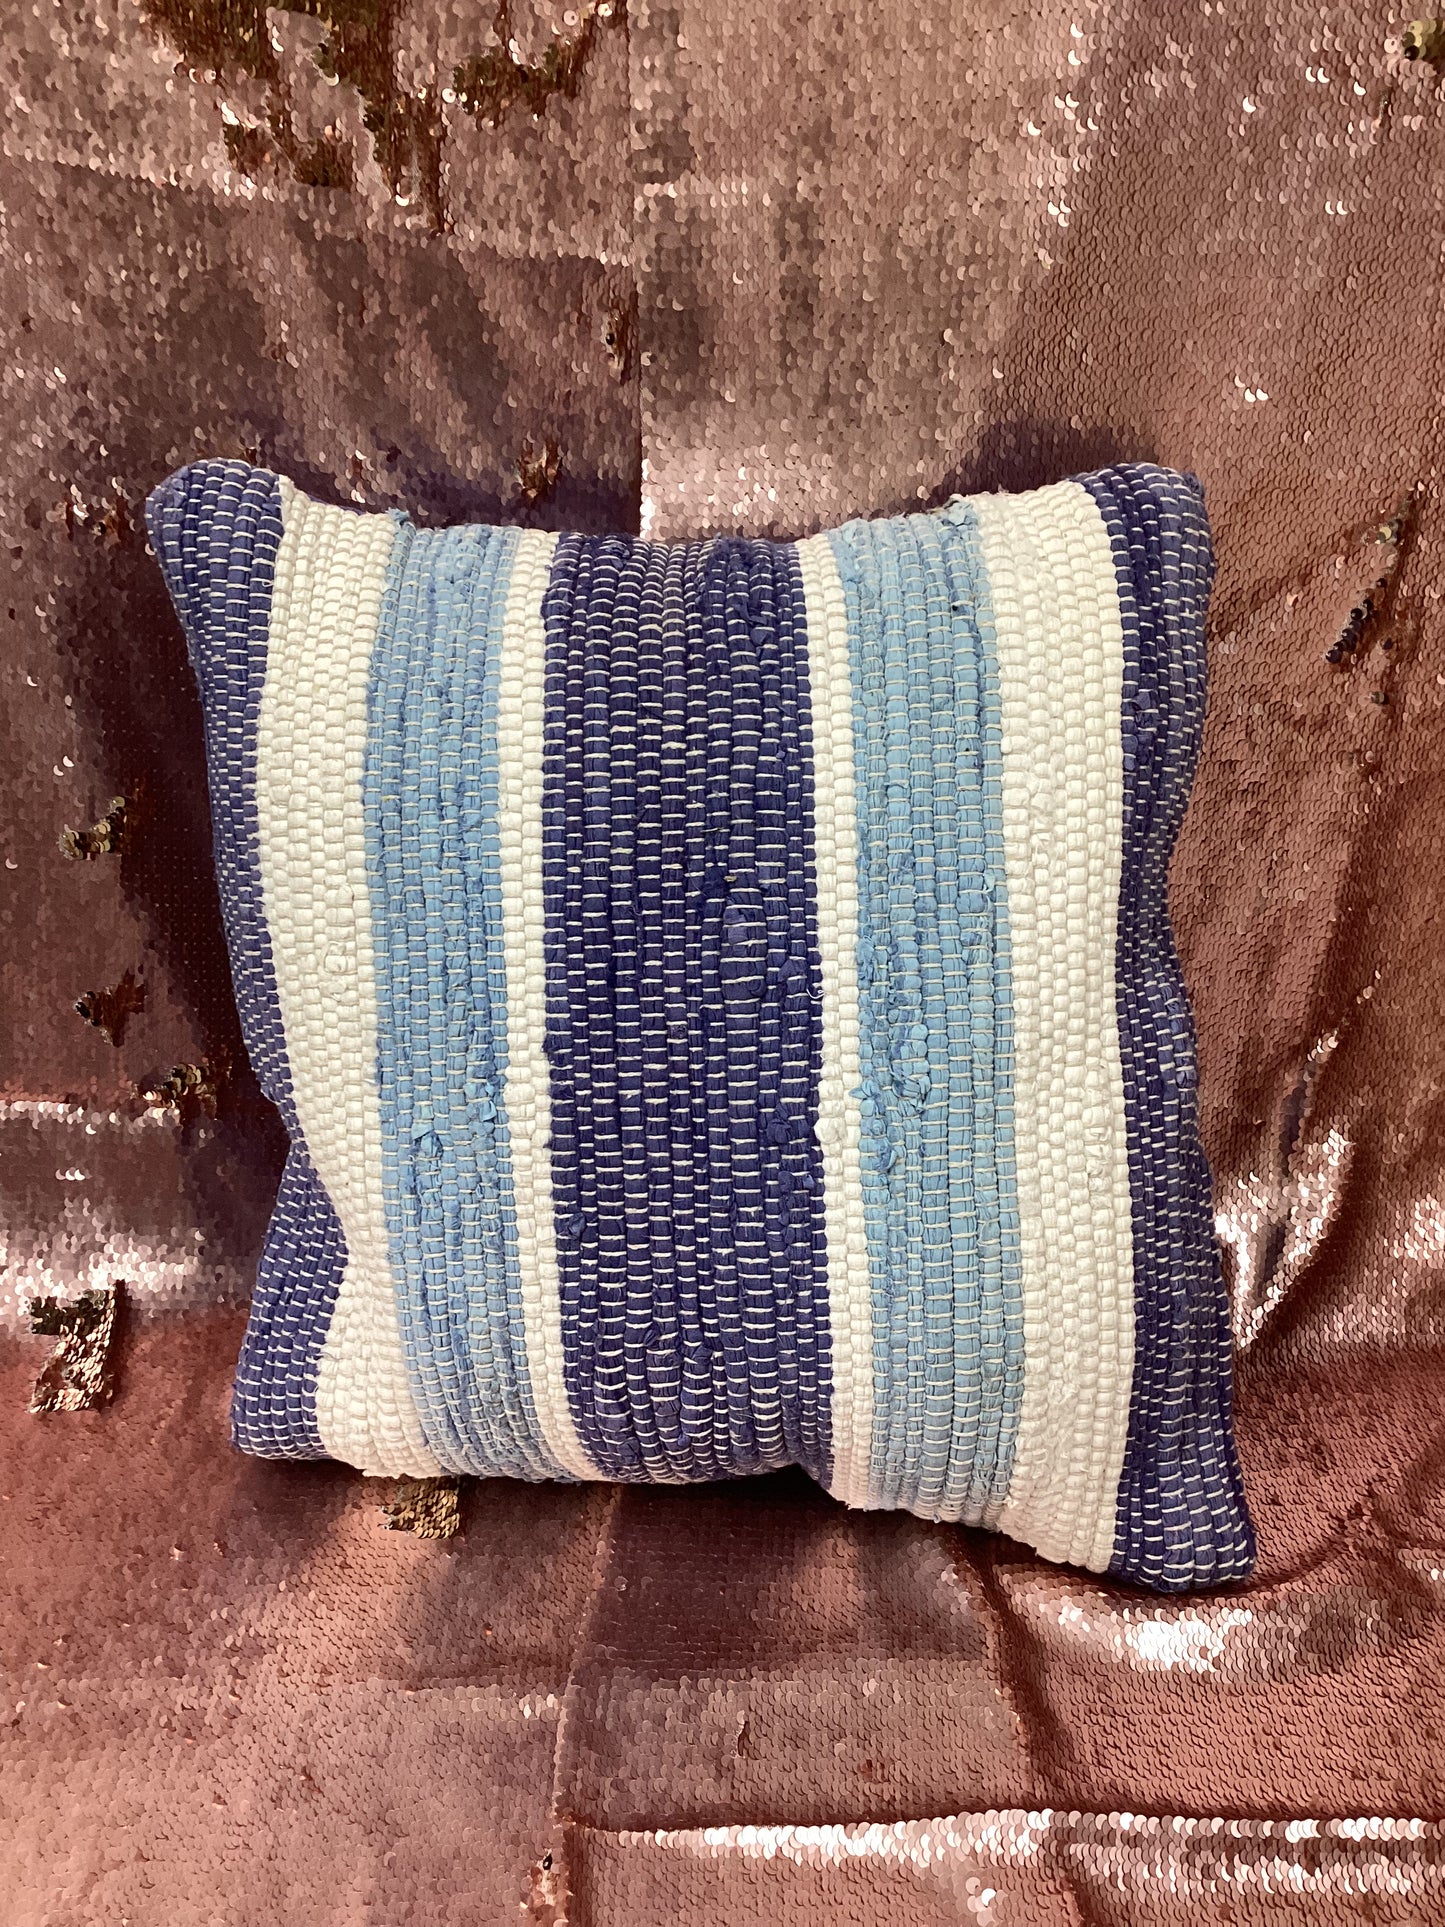 Wide Striped Navy, White, Turquoise Pillow